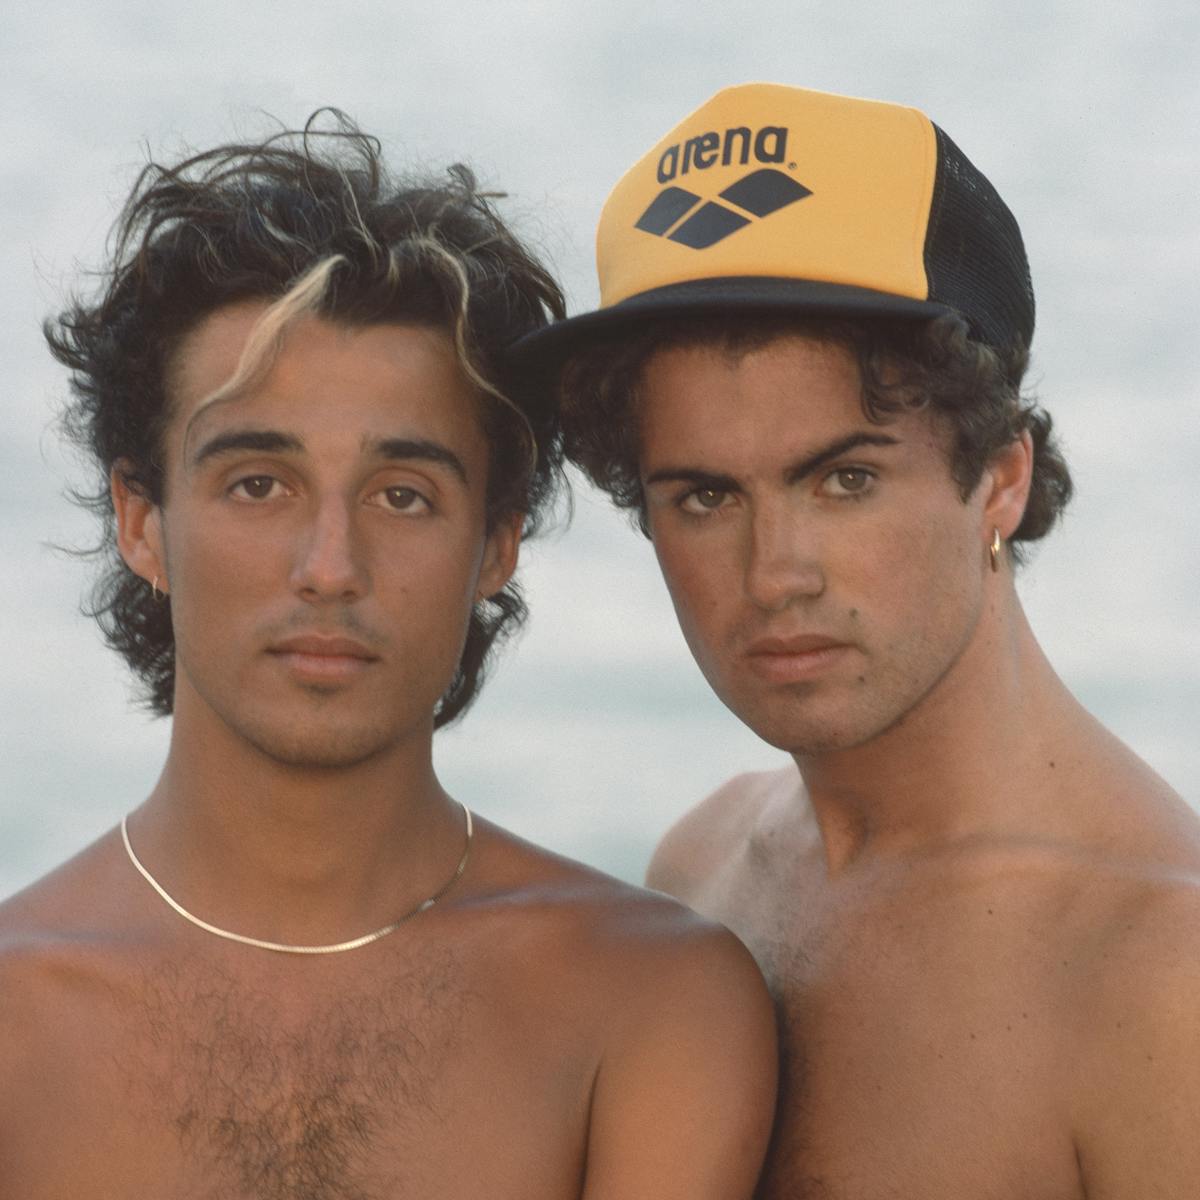 Andrew Ridgeley and George Michael pose shirtless against a beachy background.